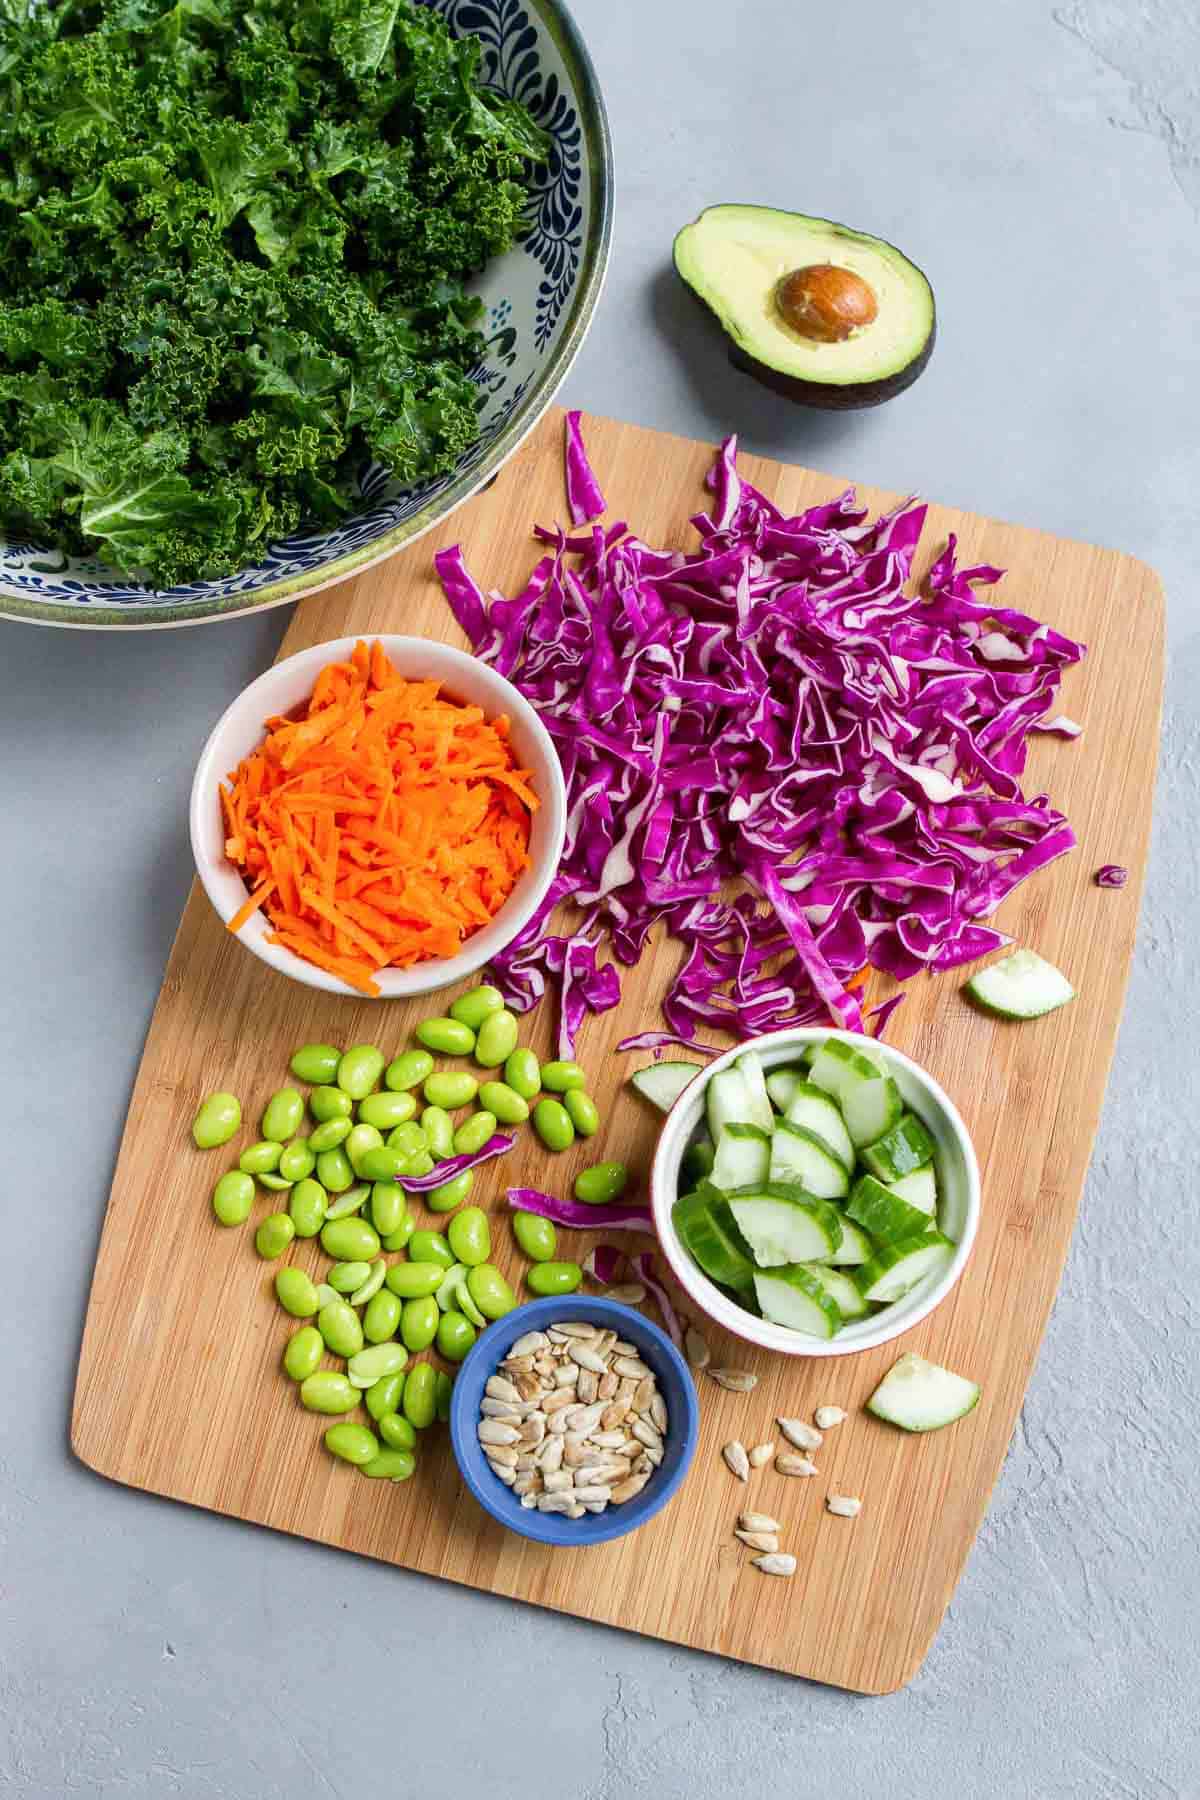 Kale, cabbage, grated carrots, cucumber, edamame, avocado, sunflower seeds and dressing on a bamboo cutting board